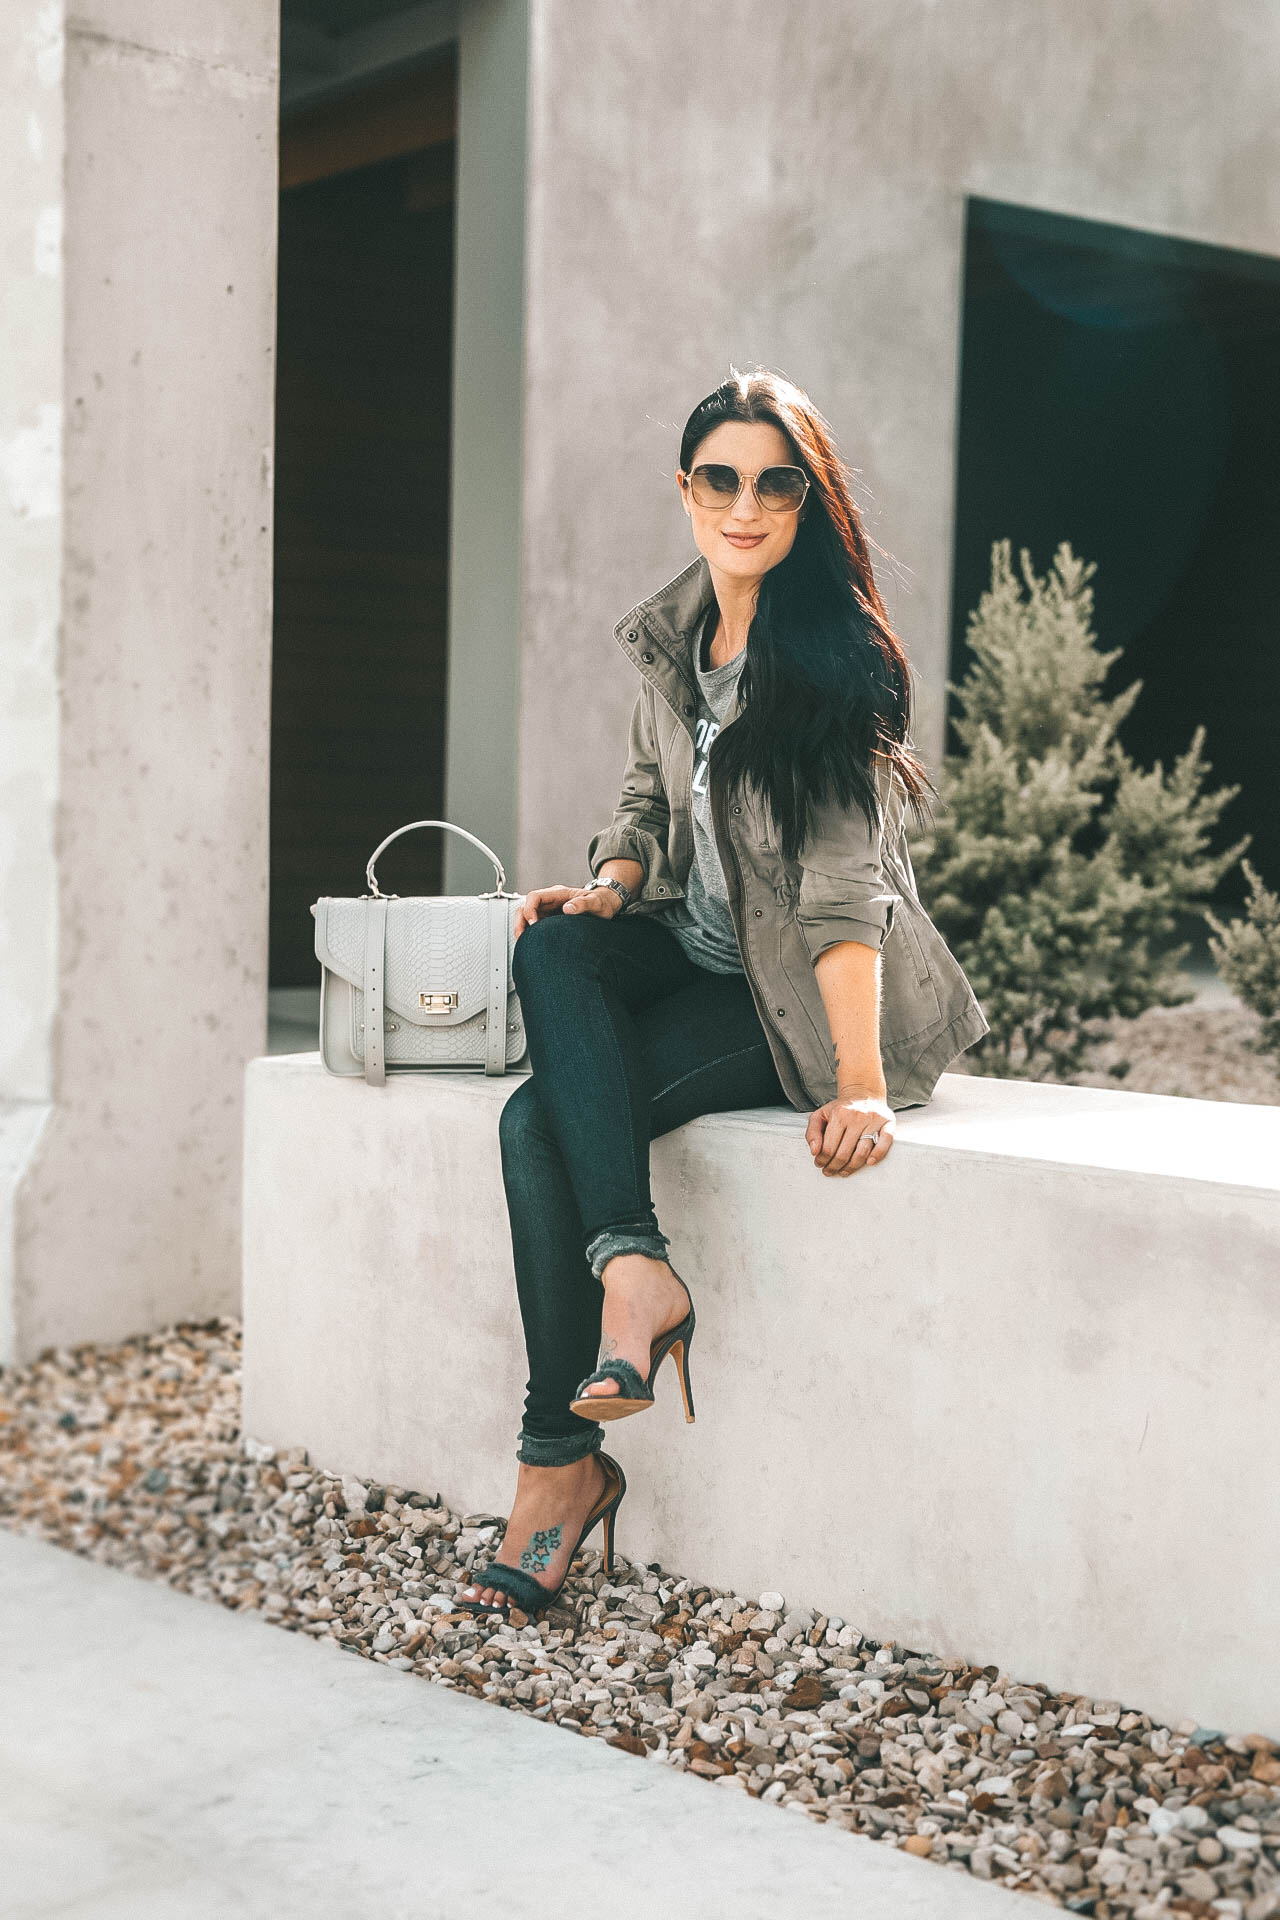 DTKAustin talks about one of her favorite new retailers at the Domain NORTHside. Marine Layer just opened and is offering a 20% discount with code DOMAINNORTHSIDE. - {Marine Layer at Domain NORTHside + 20% off Discount} featured by popular Austin fashion blogger Dressed to Kill